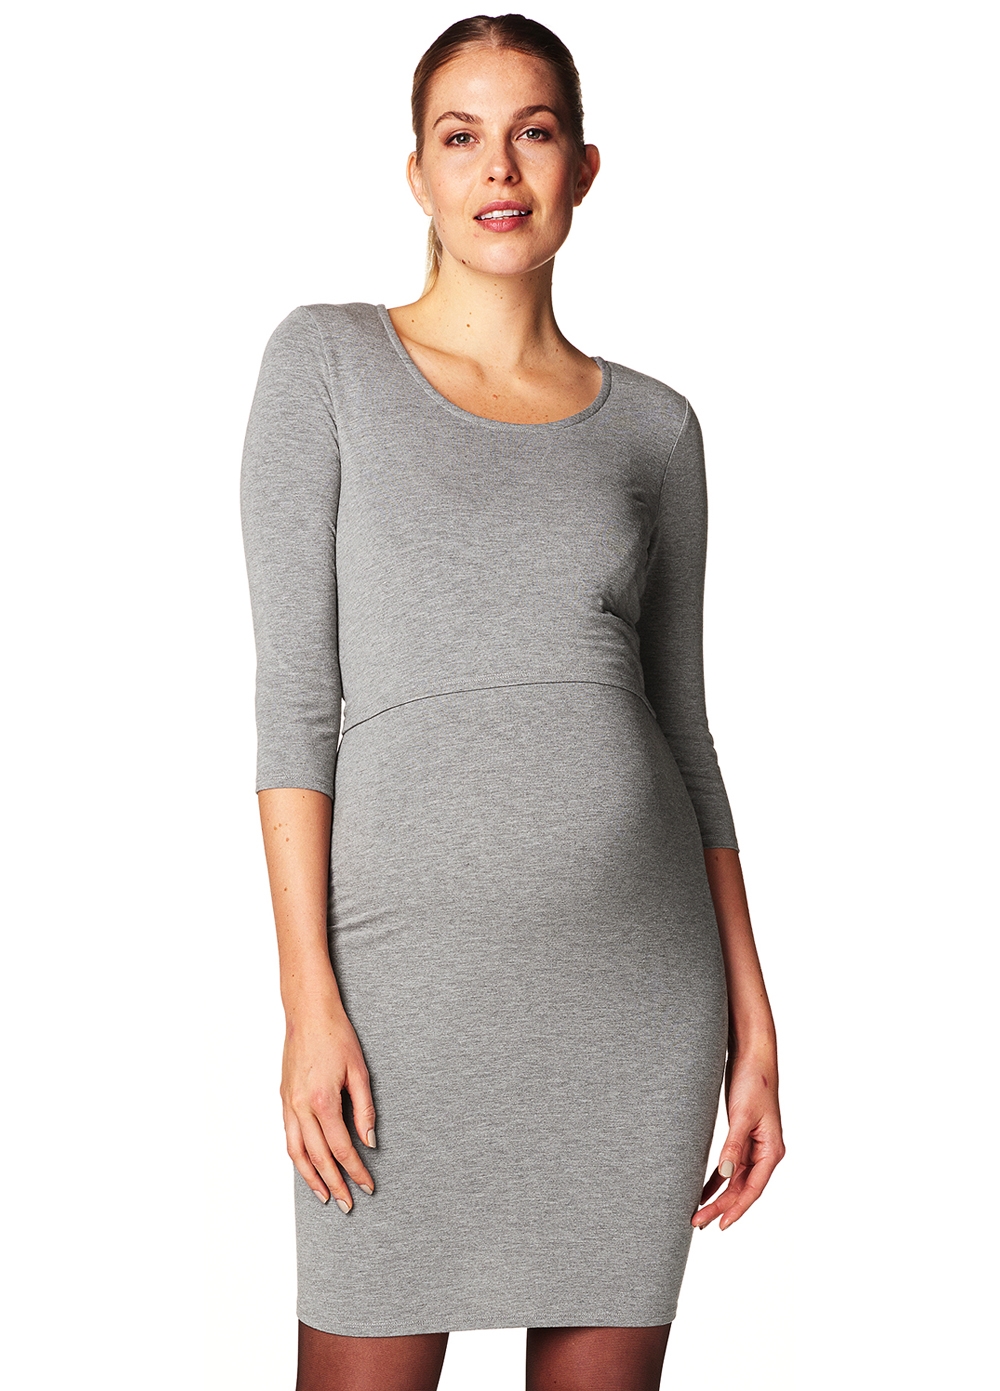 Layered Look Maternity Nursing Dress in Grey by Esprit